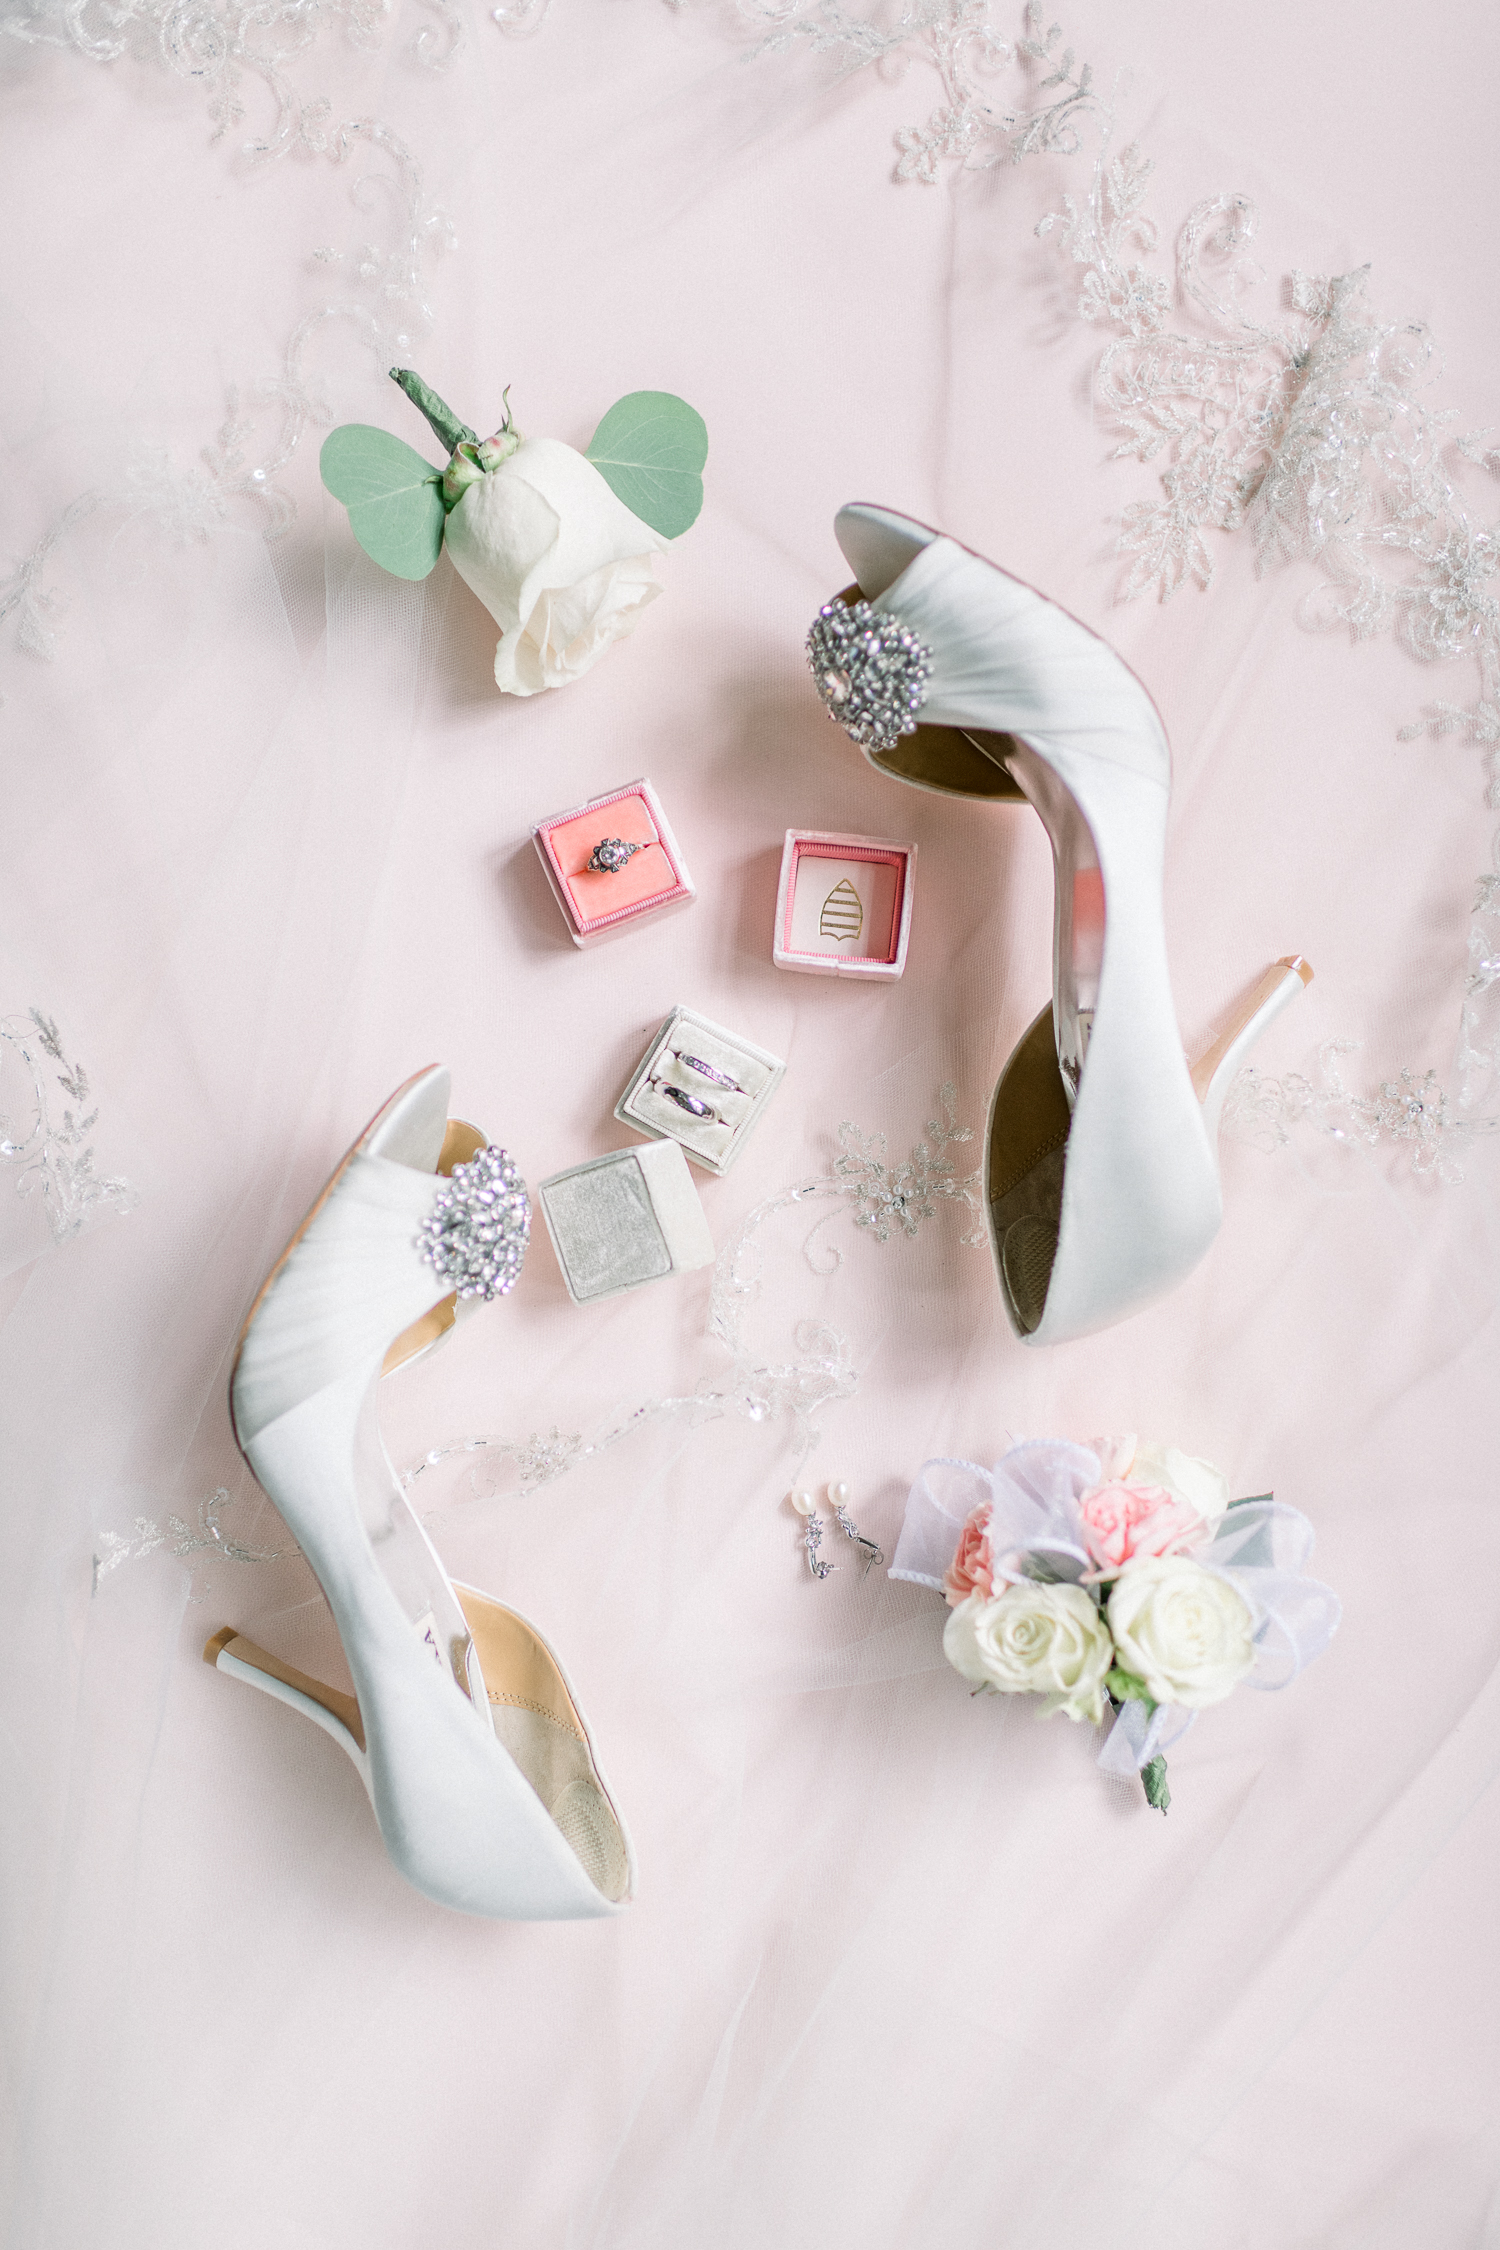 Flat lay styling of wedding details with shoes, rings, ringbox and corsages